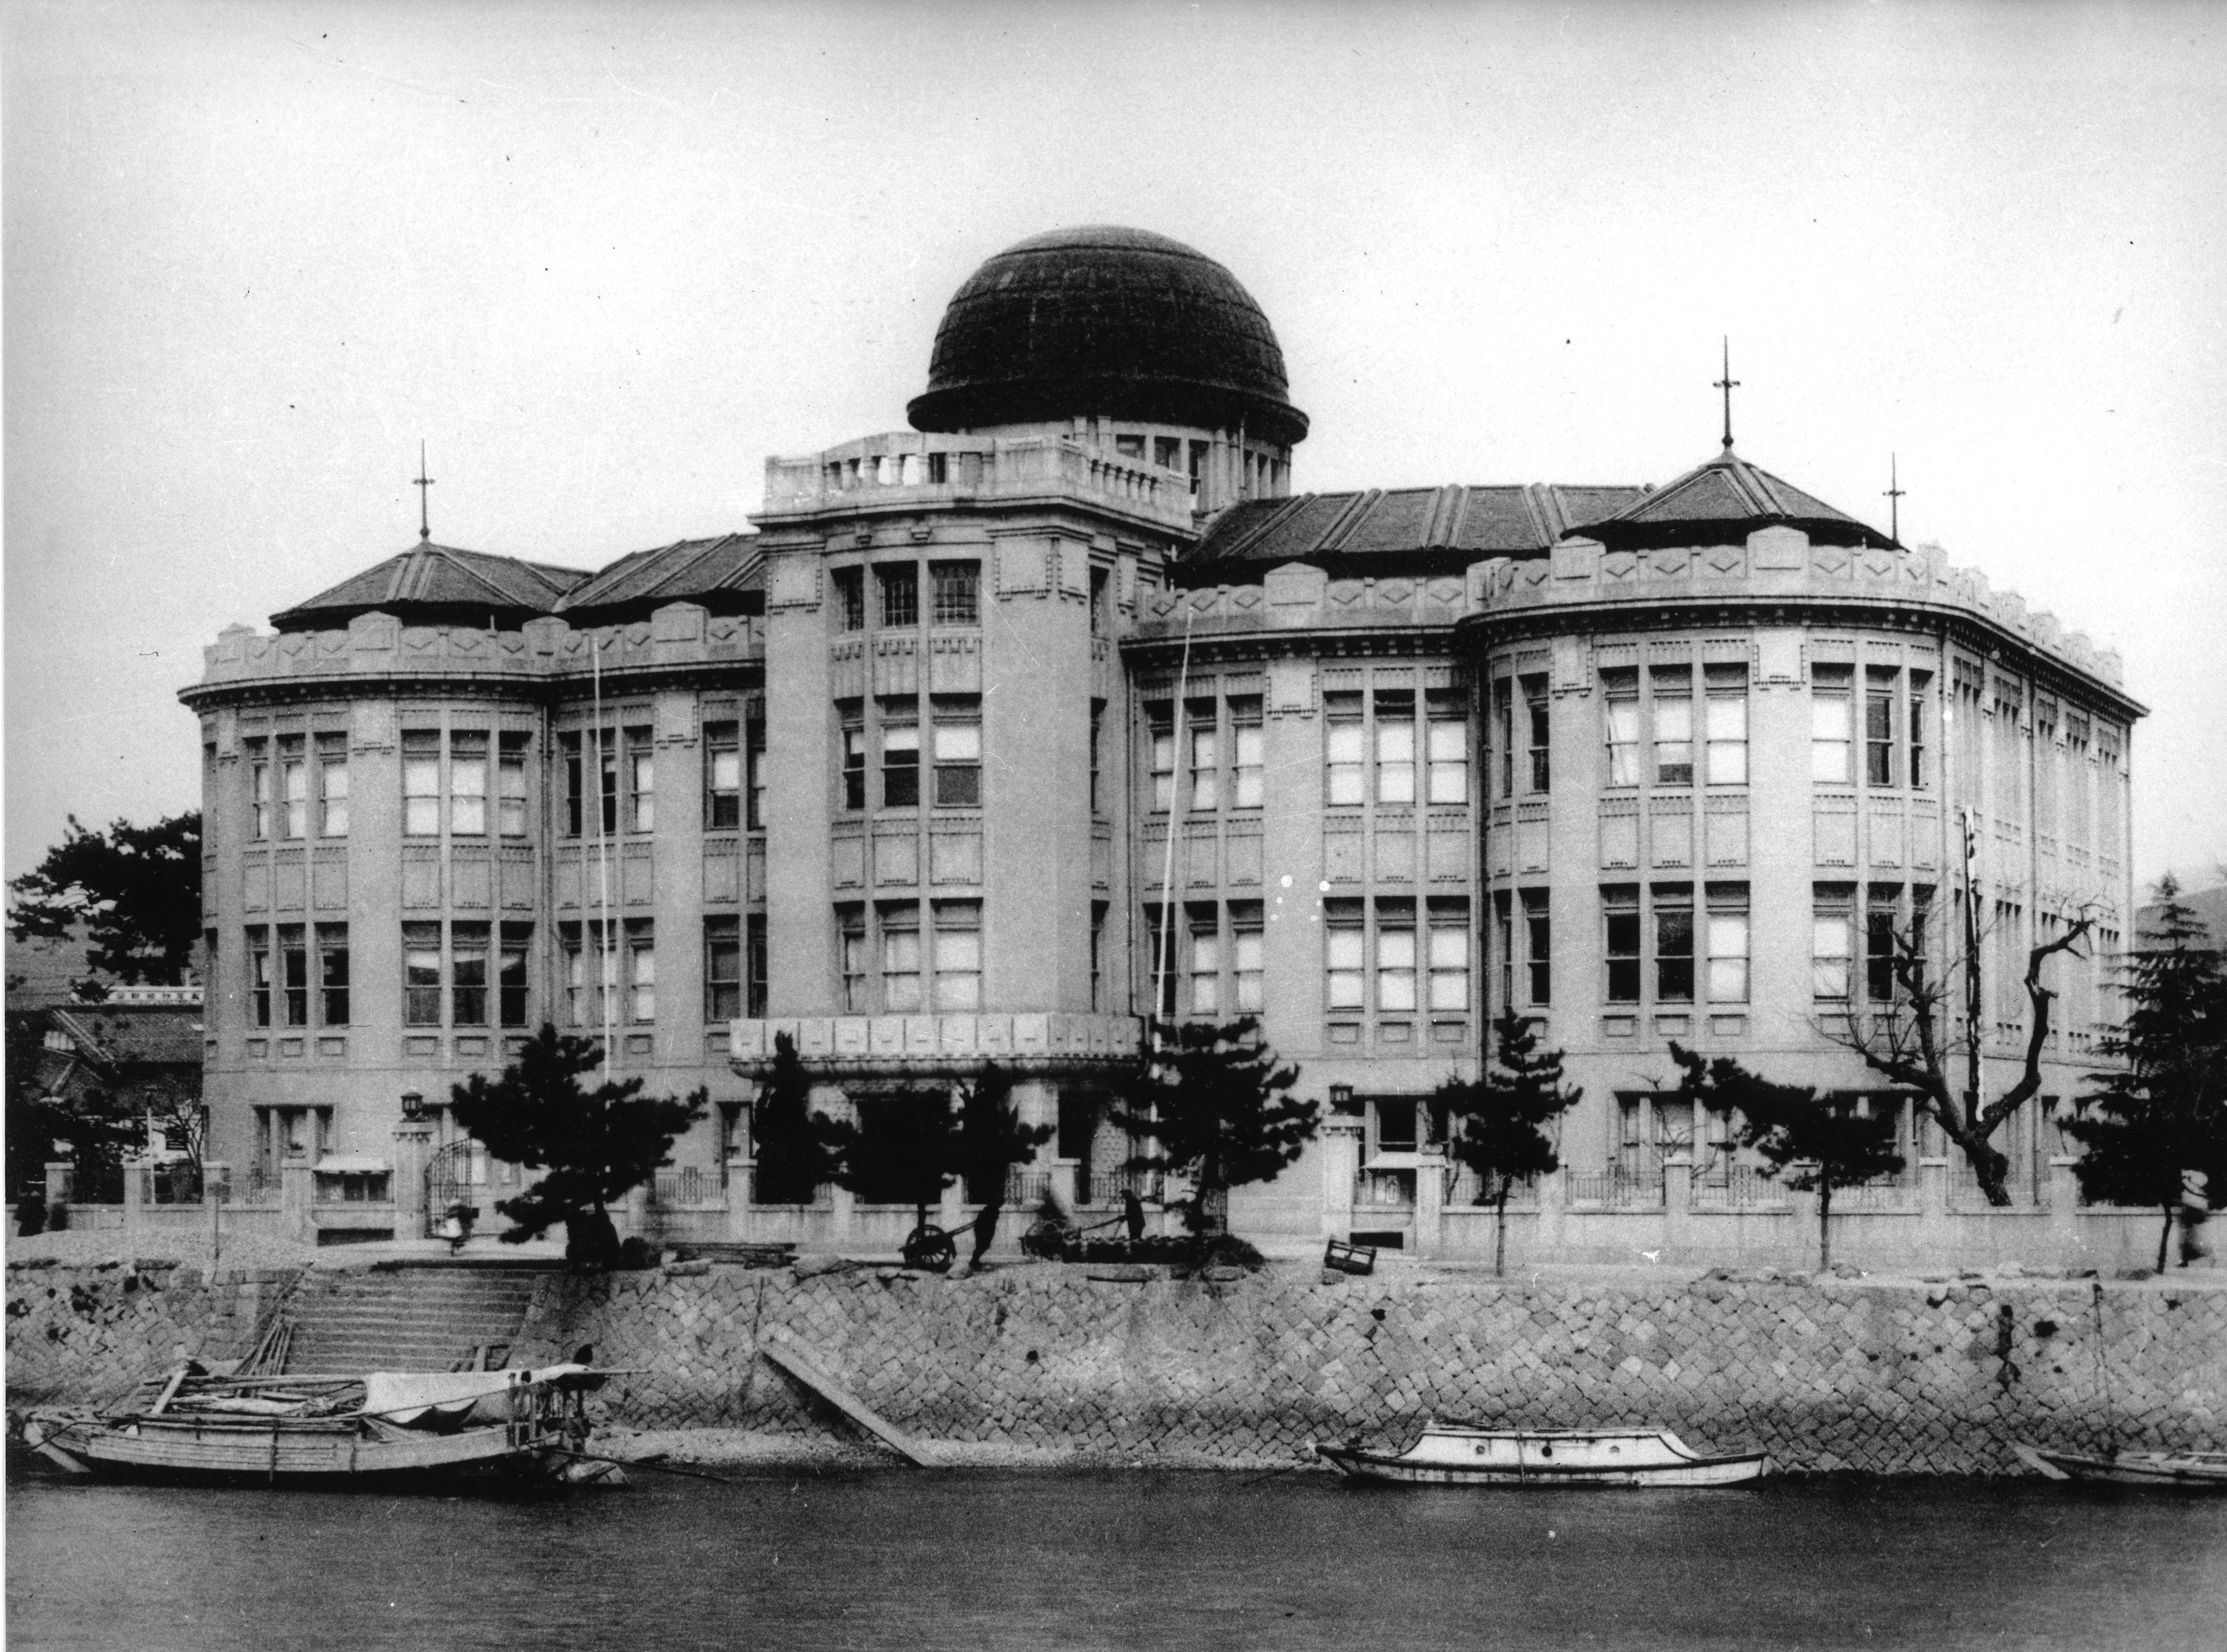 A photograph of a former prefectural building, now known as the Atomic Bomb Dome, taken sometime between 1915 and 1945. (Photo courtesy of Hiroshima Peace Memorial Museum